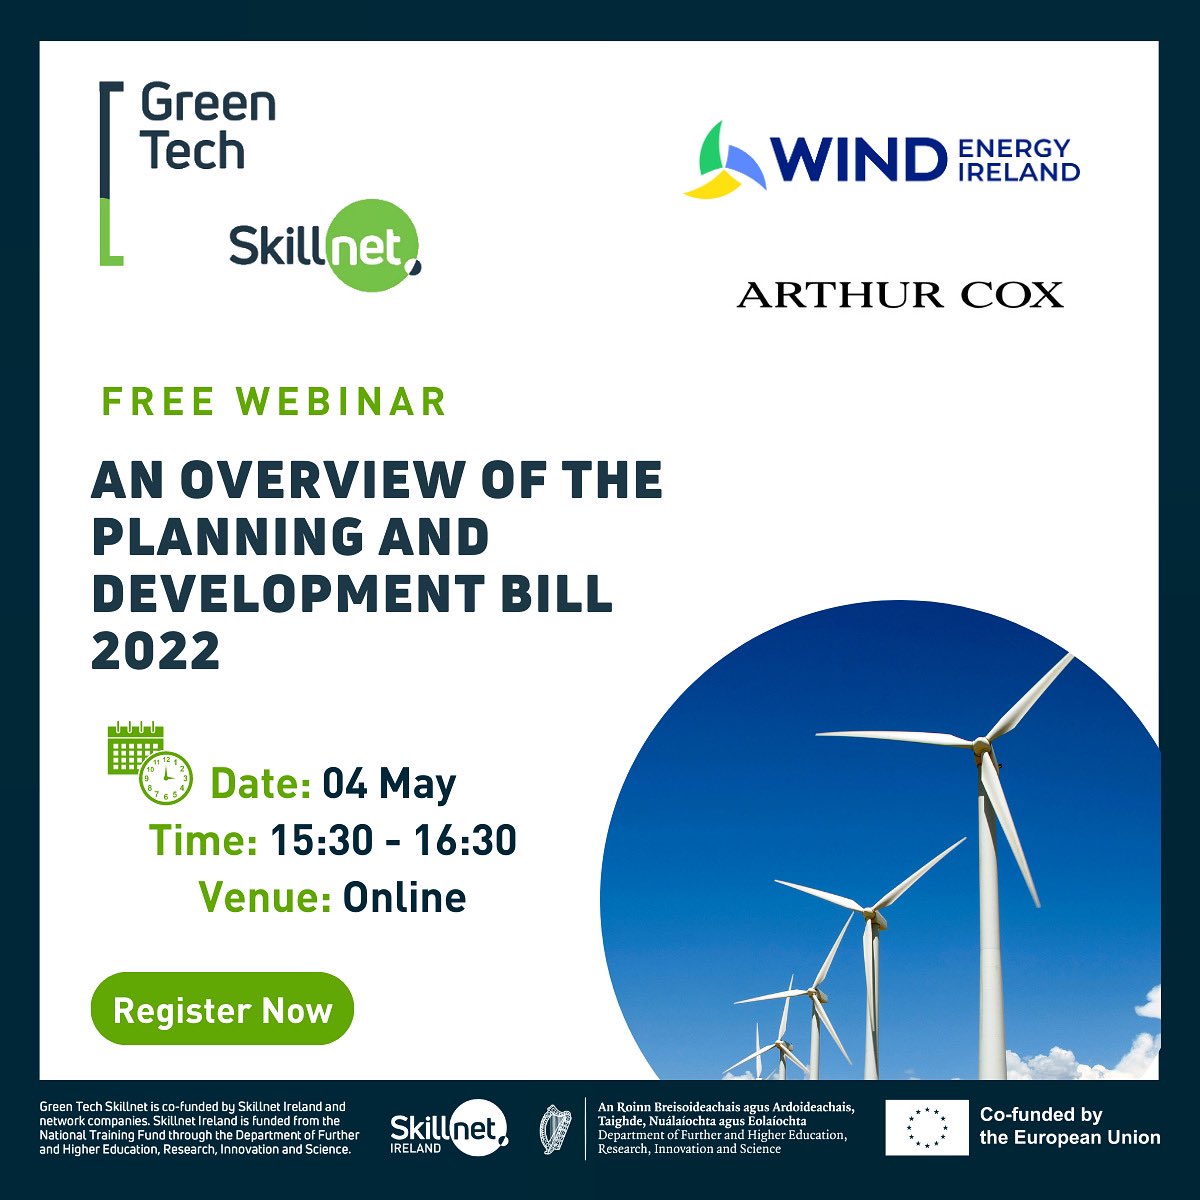 Join us for our upcoming webinar, An Overview of the Planning and Development Bill 2022, in partnership with @ArthurCoxLaw, this Thursday. 

Visit our website to find out more and to Register : greentechskillnet.com/webinar-the-ge…

#planningreform #windenergy